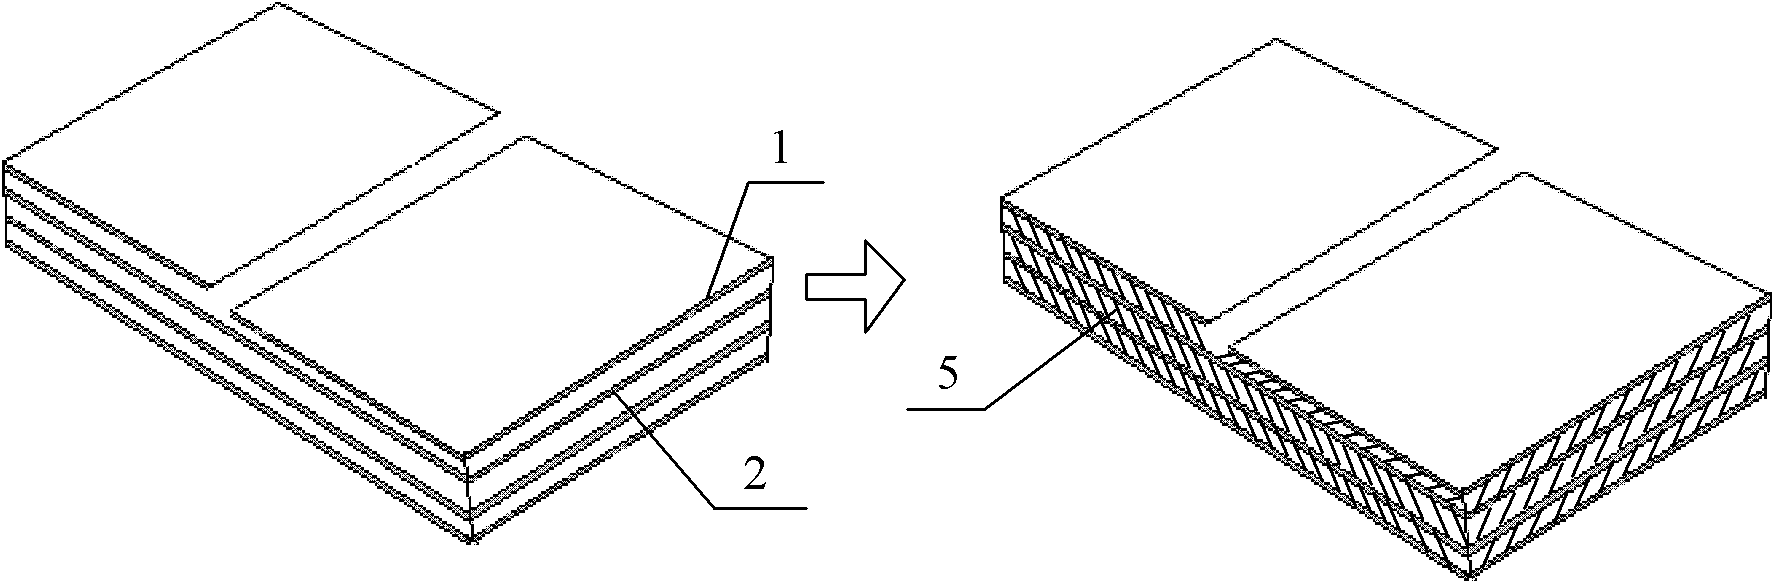 Golden finger and plate edge interconnection device